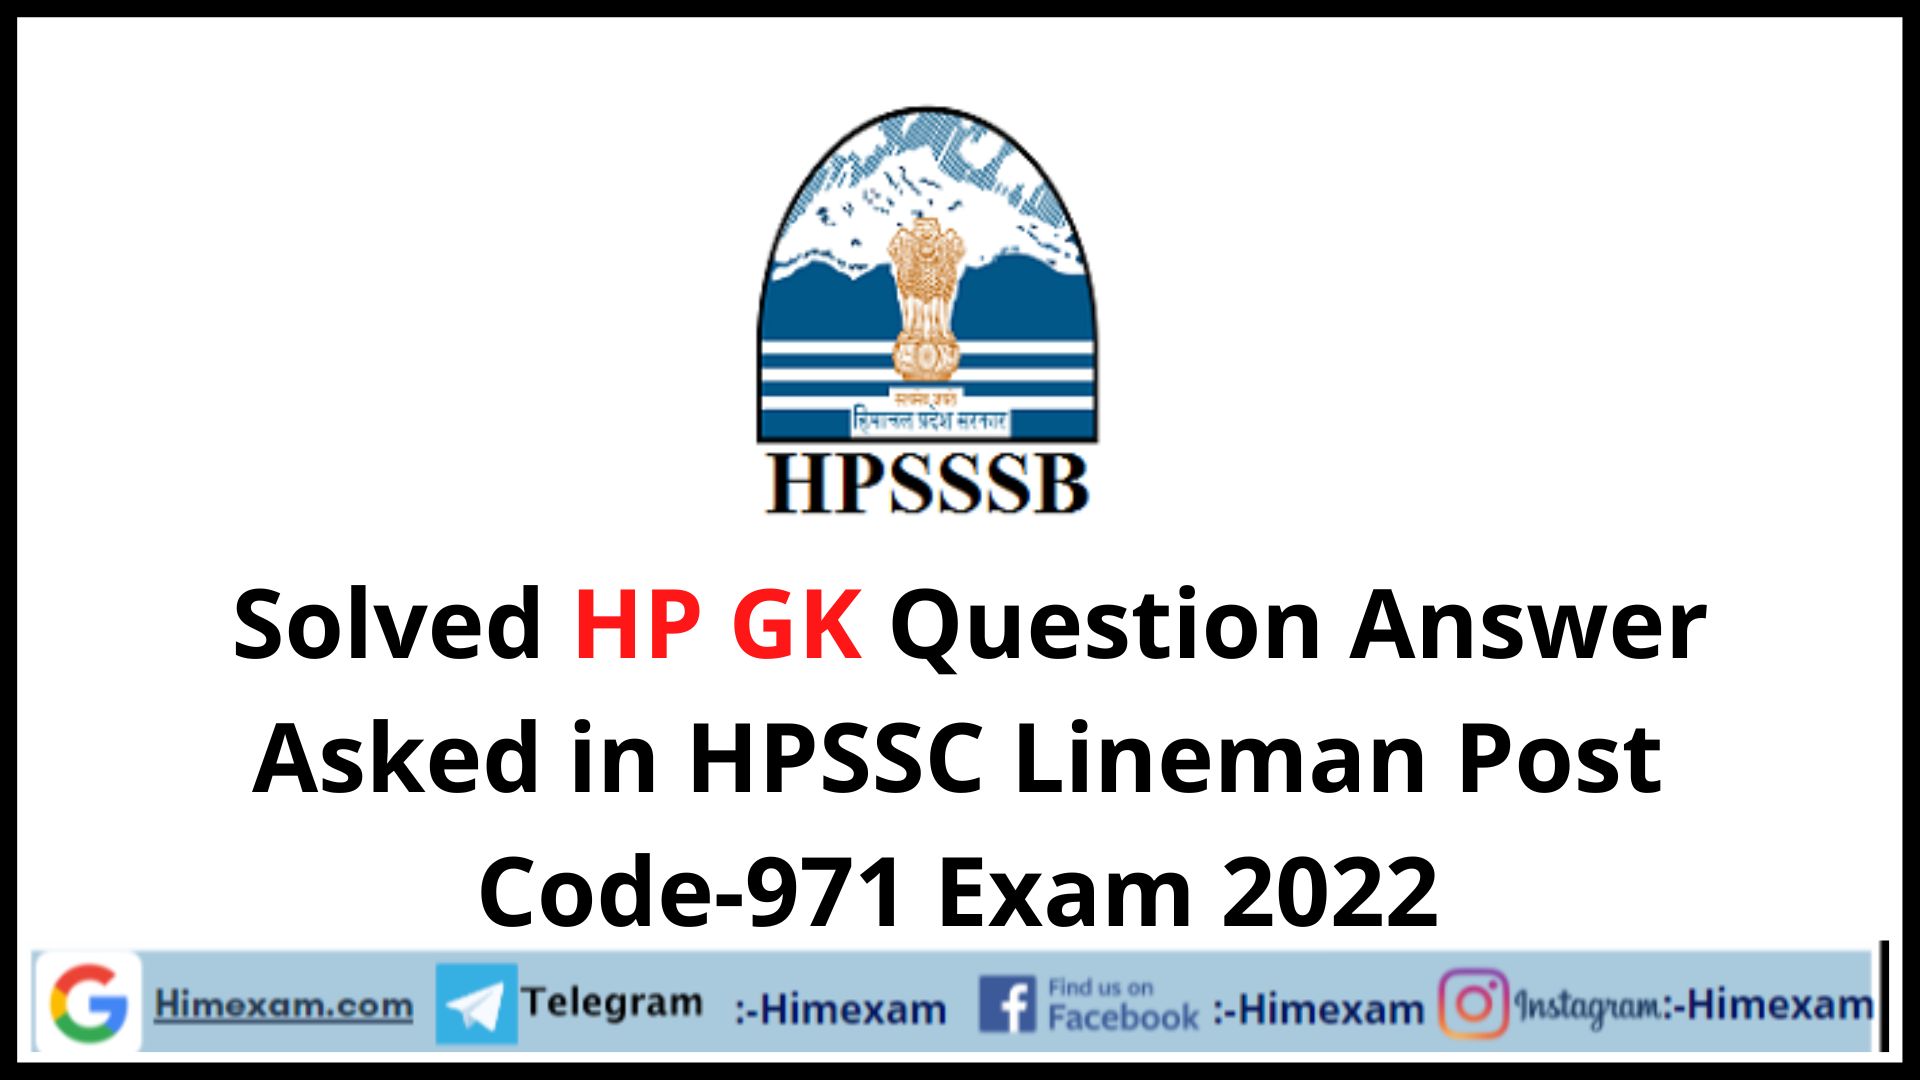 Solved HP GK Question Answer Asked in HPSSC Lineman Post Code-971 Exam 2022